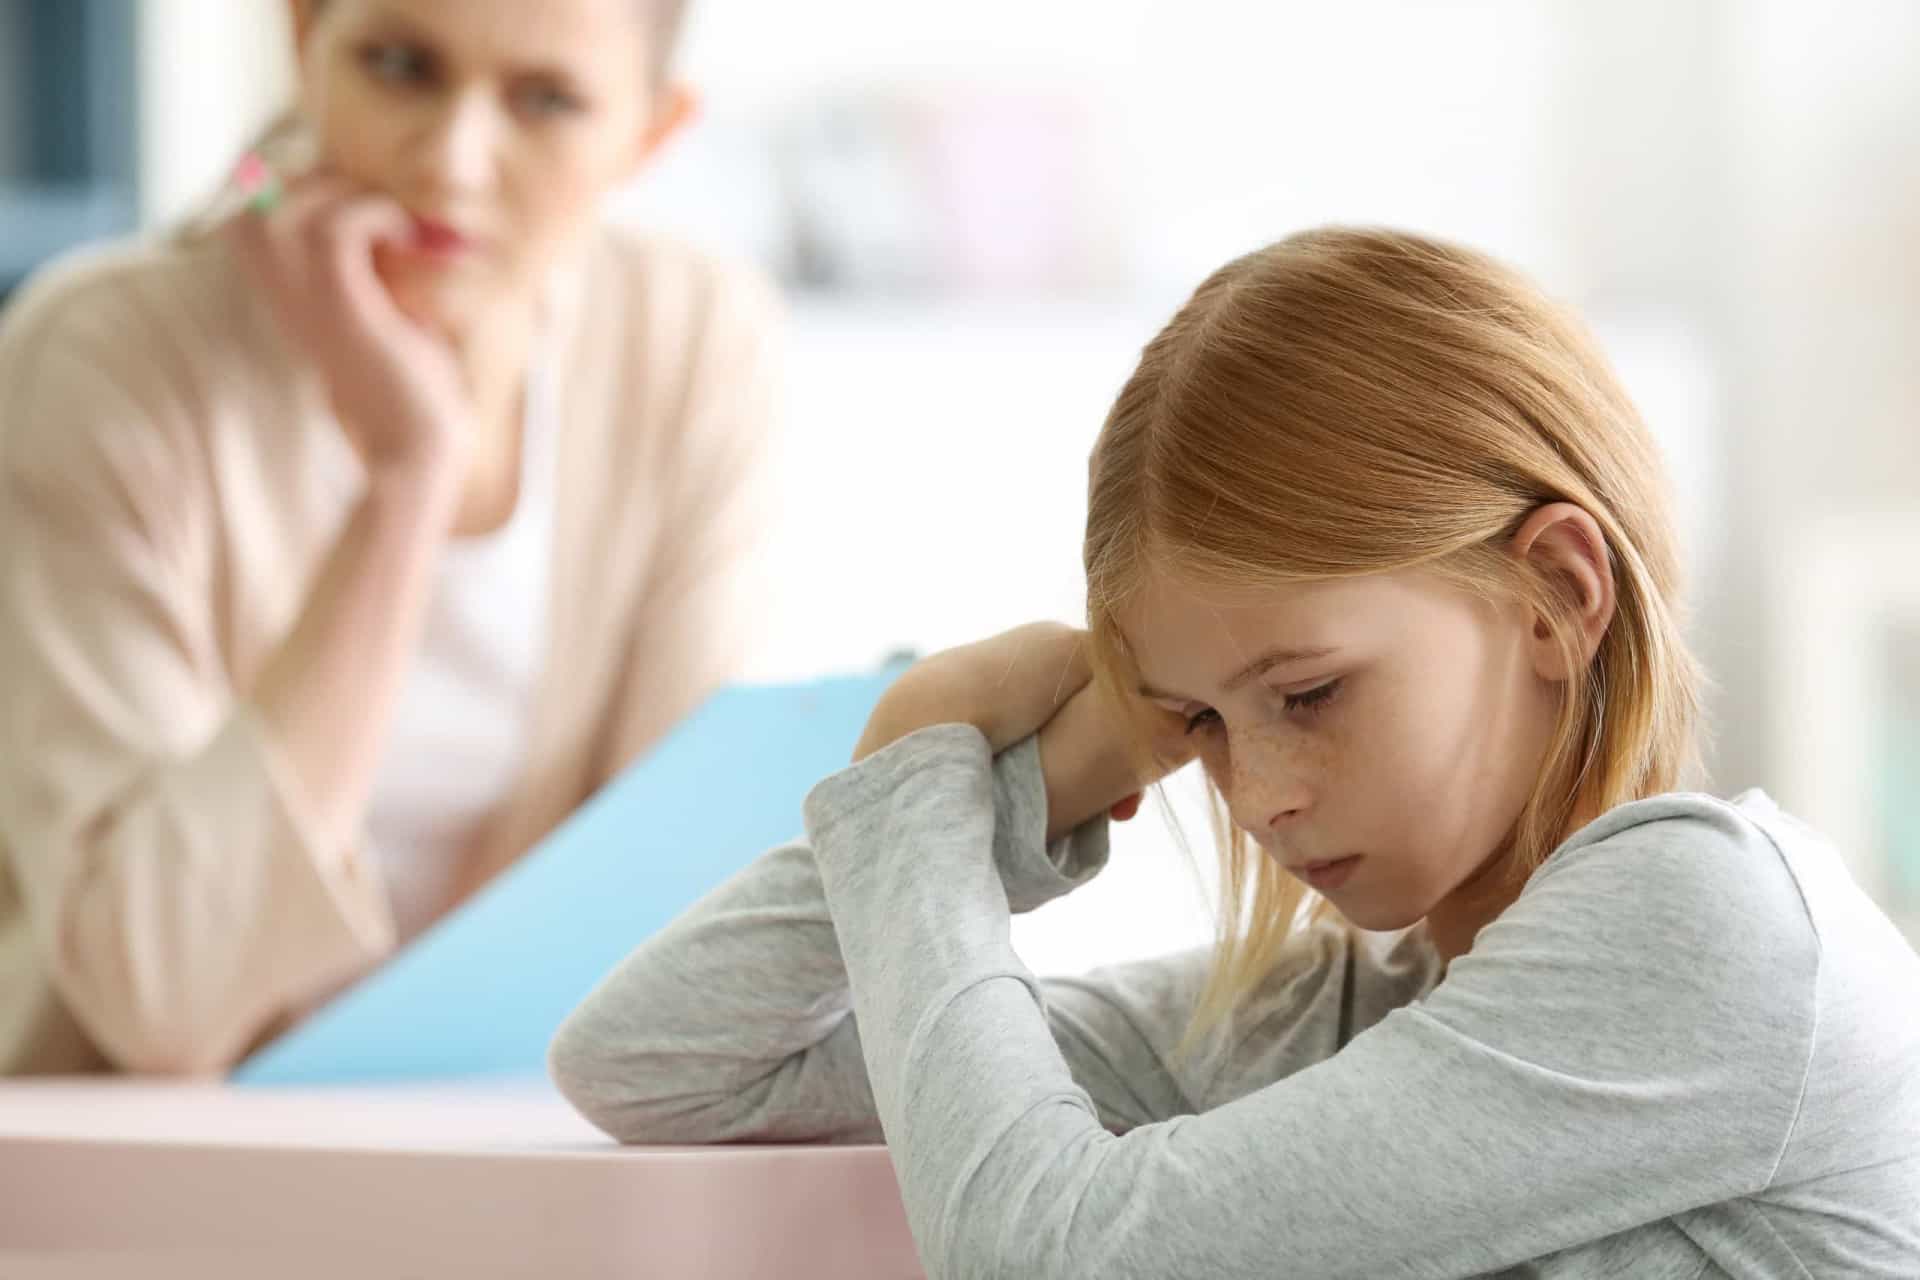 <p><span>The main symptom of selective mutism is a marked contrast in the way a child interacts with different people. </span></p><p>You may also like:<a href="https://www.starsinsider.com/n/204595?utm_source=msn.com&utm_medium=display&utm_campaign=referral_description&utm_content=521574en-us"> Fascinating facts that will change how you see 'The Sixth Sense'</a></p>